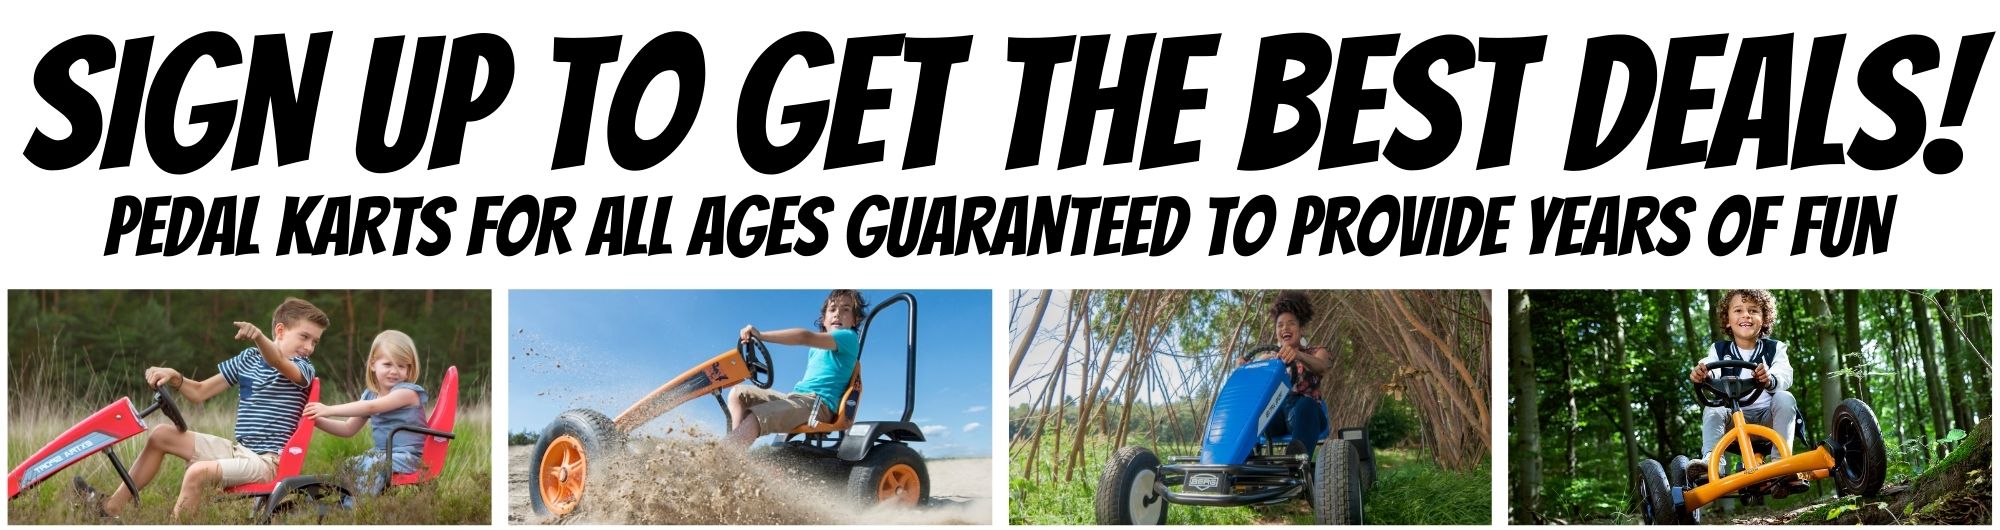 Get the best deal on your pedal kart purchase. Pedal kart financing is available.